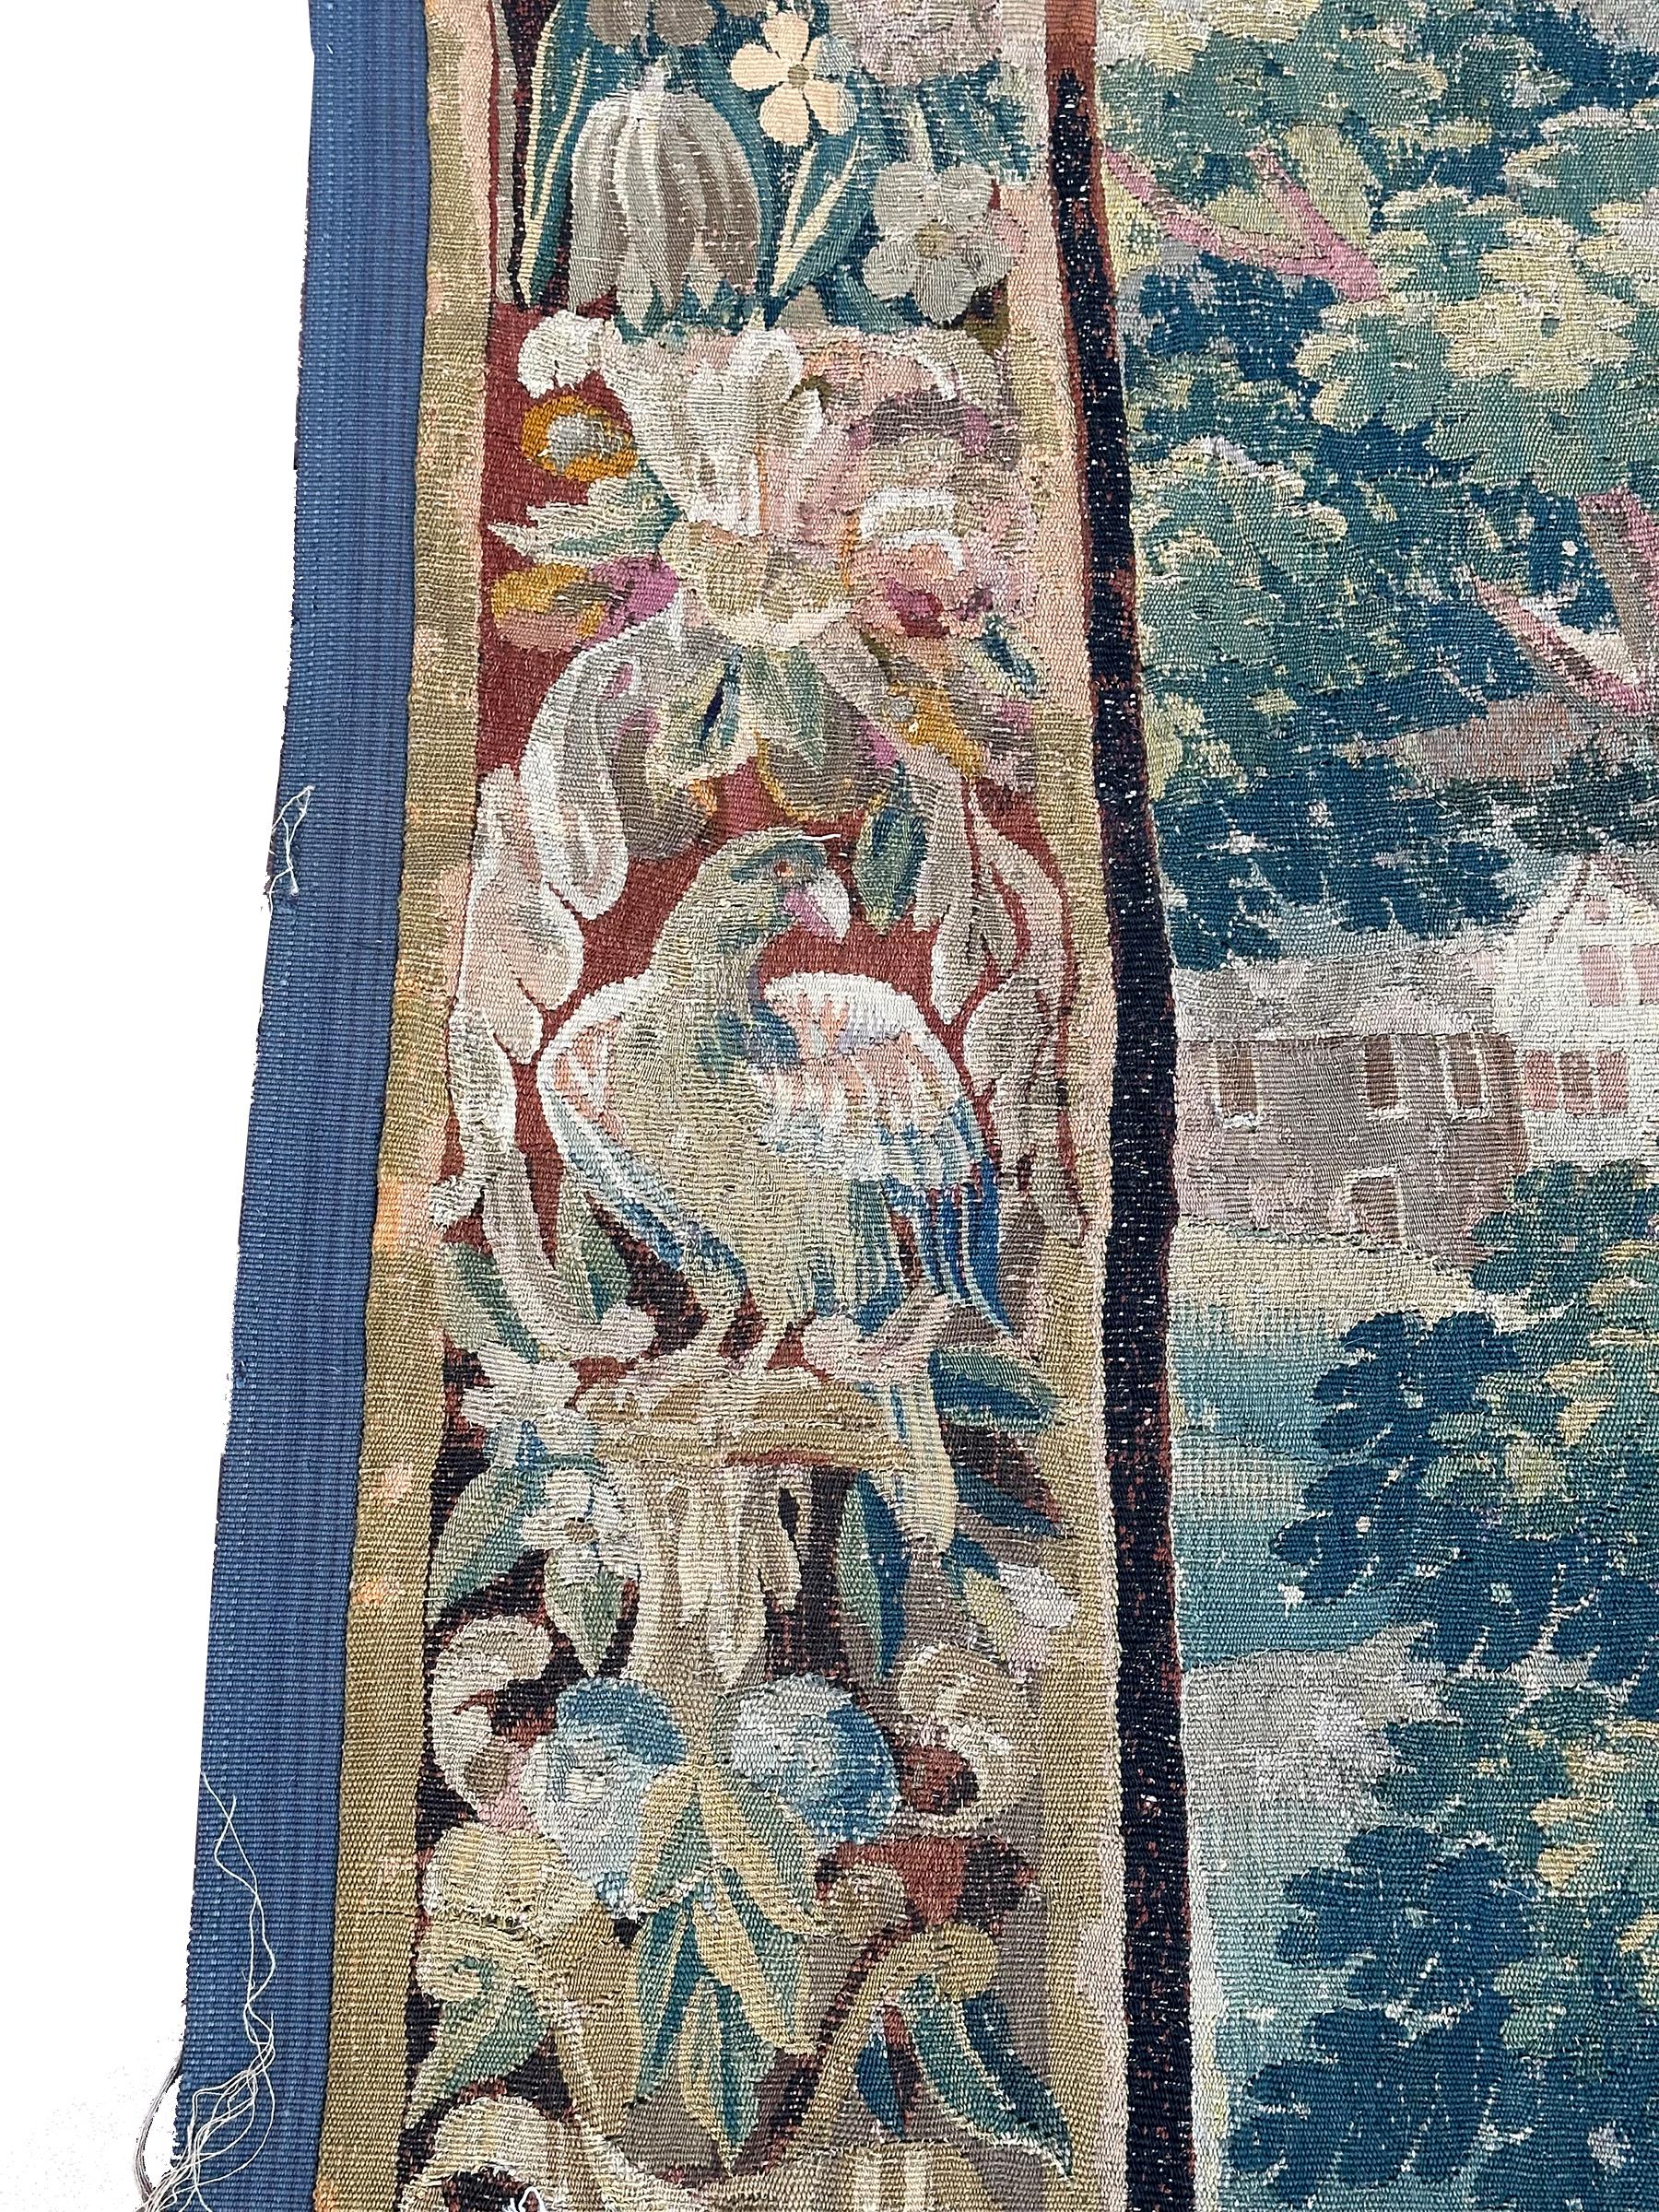 Early 18th century Flemish antique tapestry 10x13 Verdure Wool & Silk 297x384cm For Sale 10